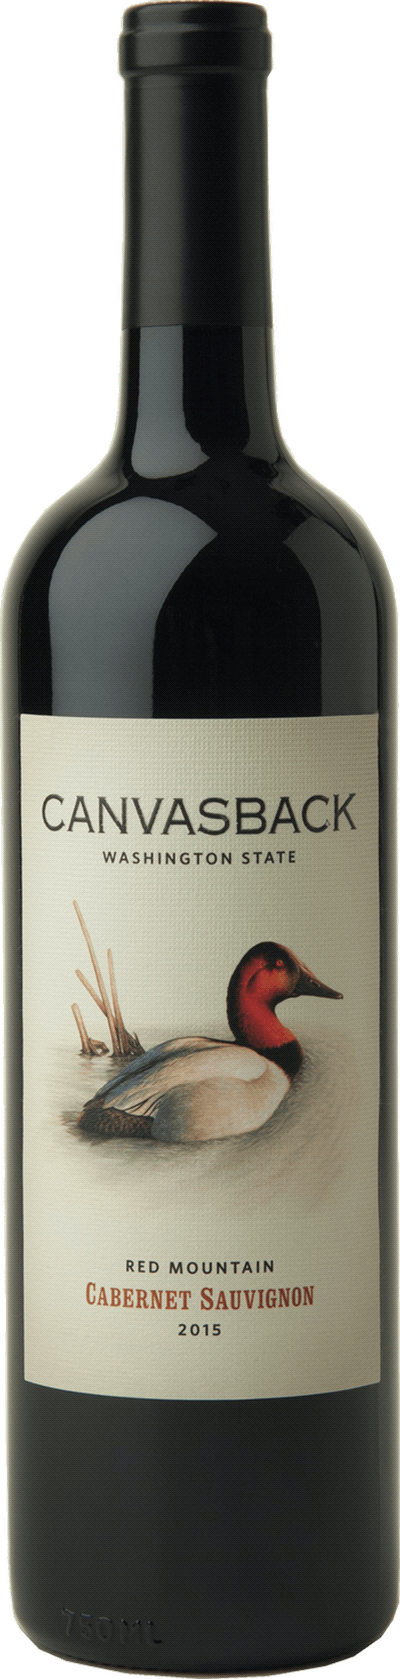 Canvasback Washington State Red Mountain Cabernet Sauvignon, 2018 |  Systembolaget